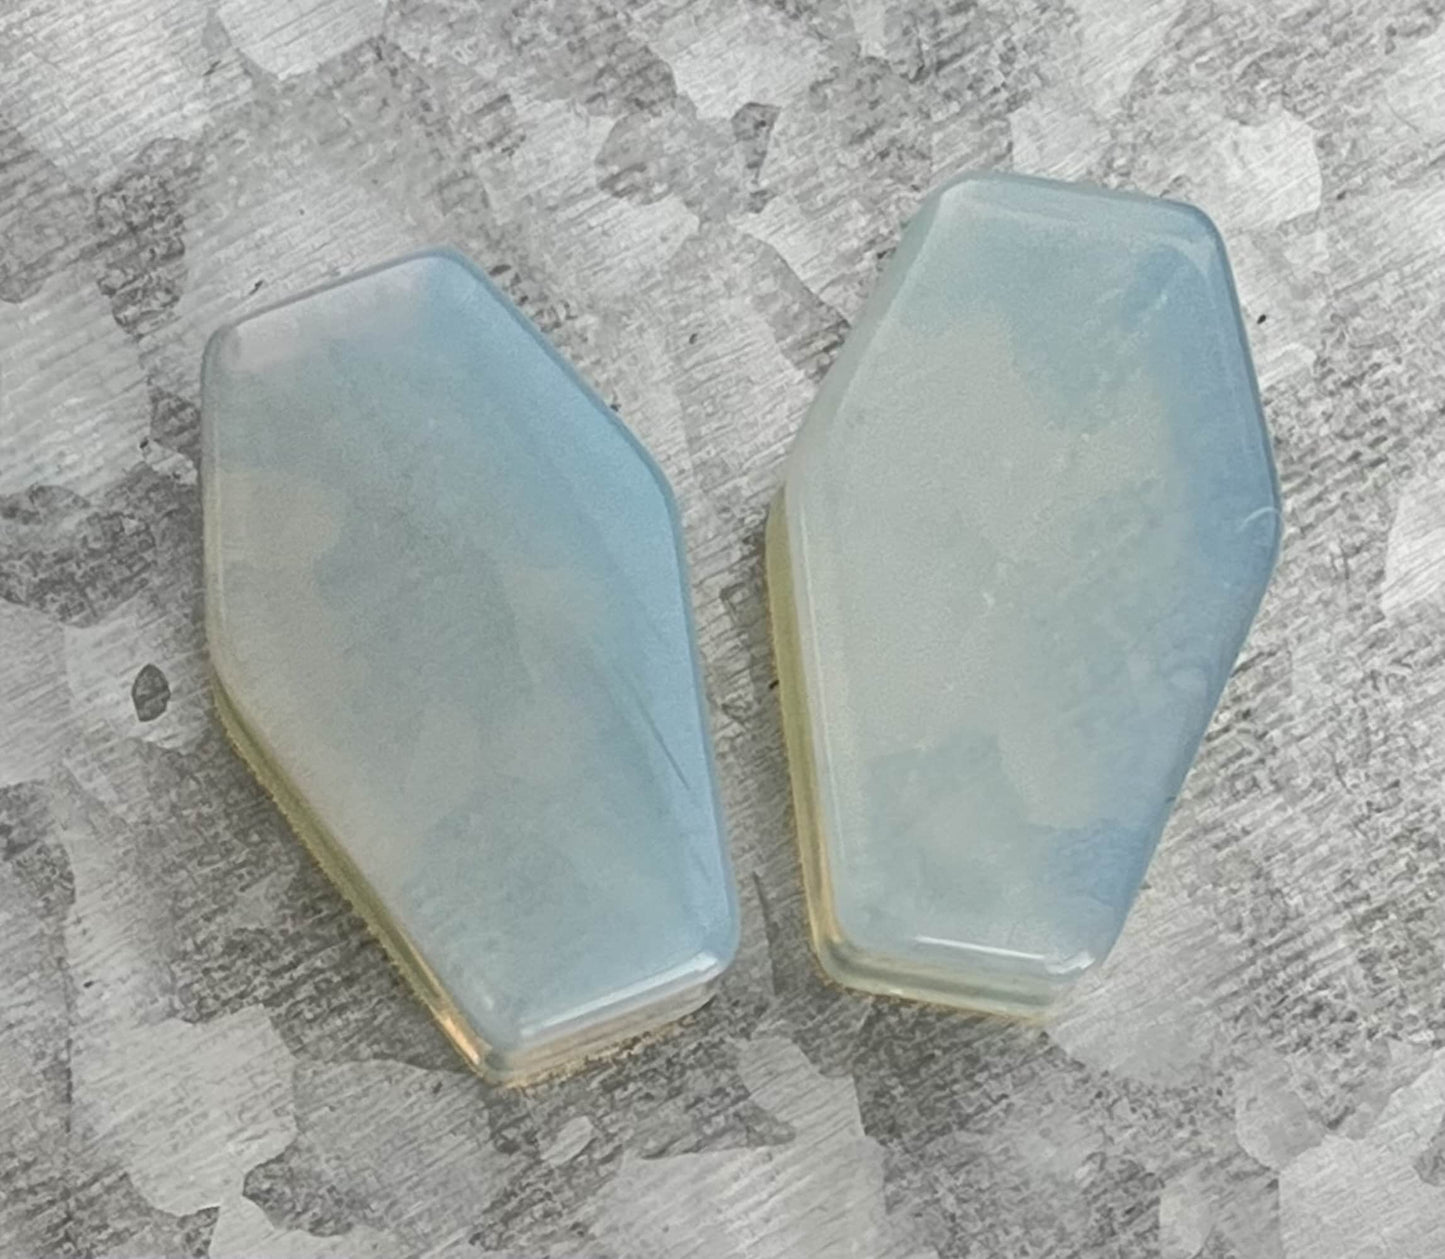 PAIR of Unusual Coffin Shaped Opalite Glass Stone Double Flare Plugs - Gauges 2g (6mm) to 1" (25mm) Available!